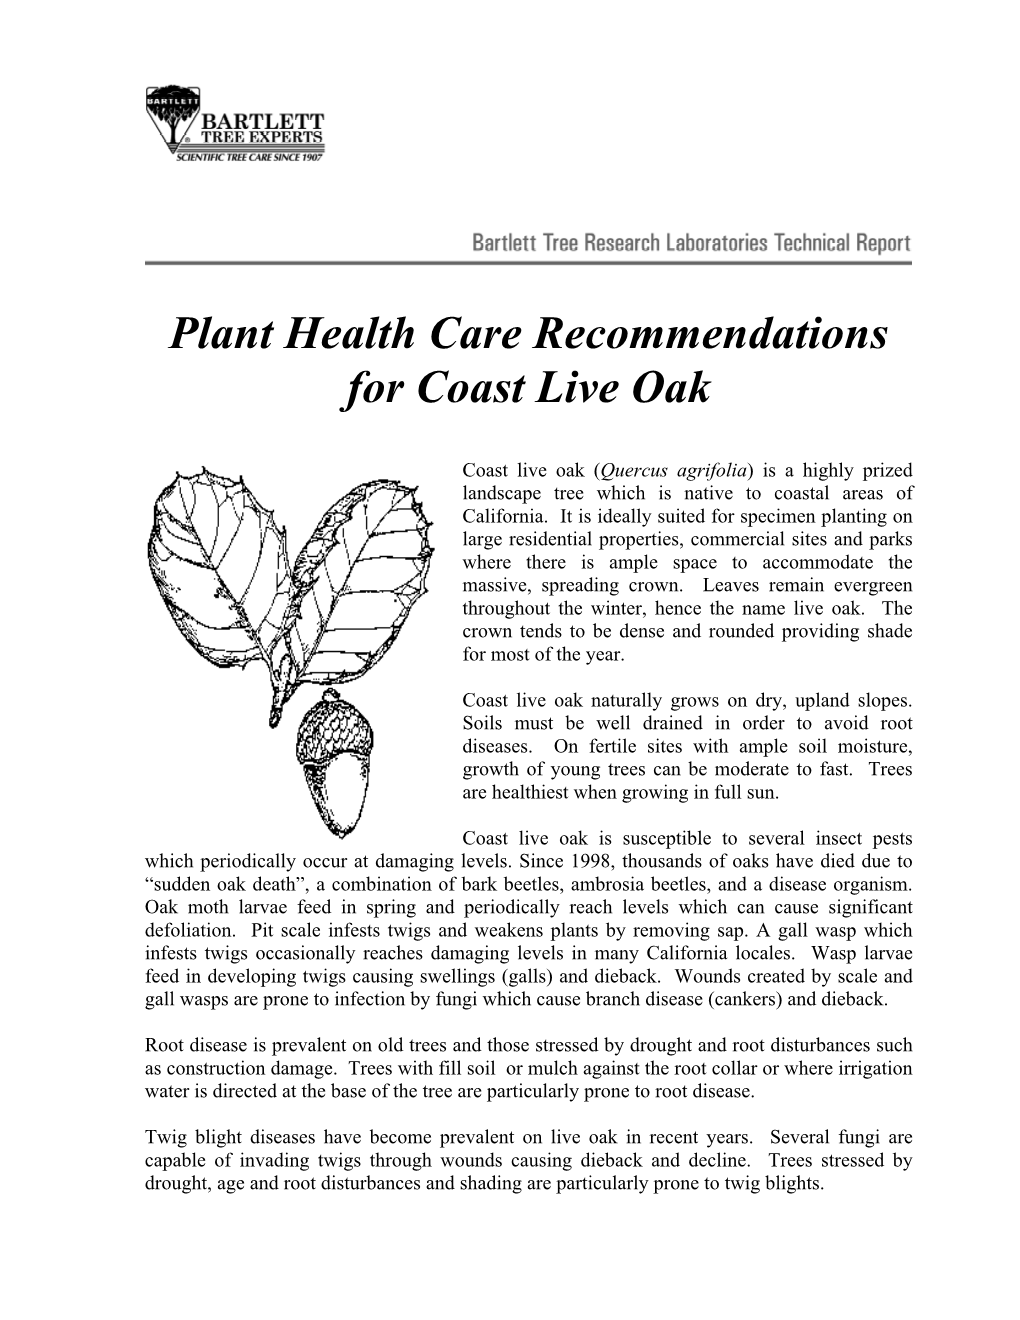 Plant Health Care Recommendations for Coast Live Oak